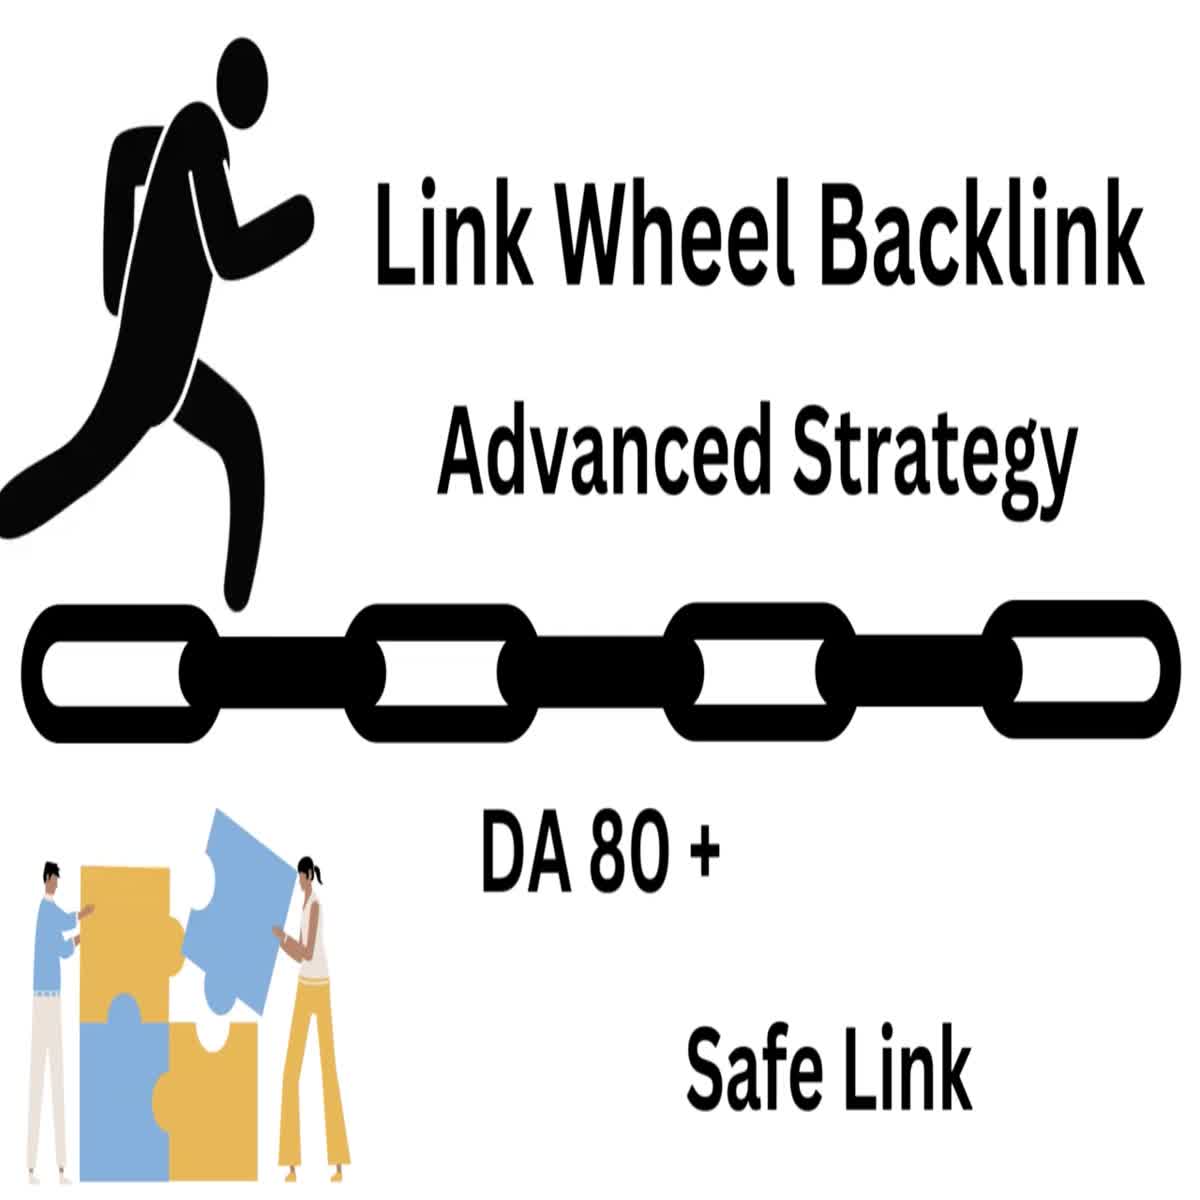 The most advanced linkwheel backlink on 80 high DA to bring traffic to your website with articles